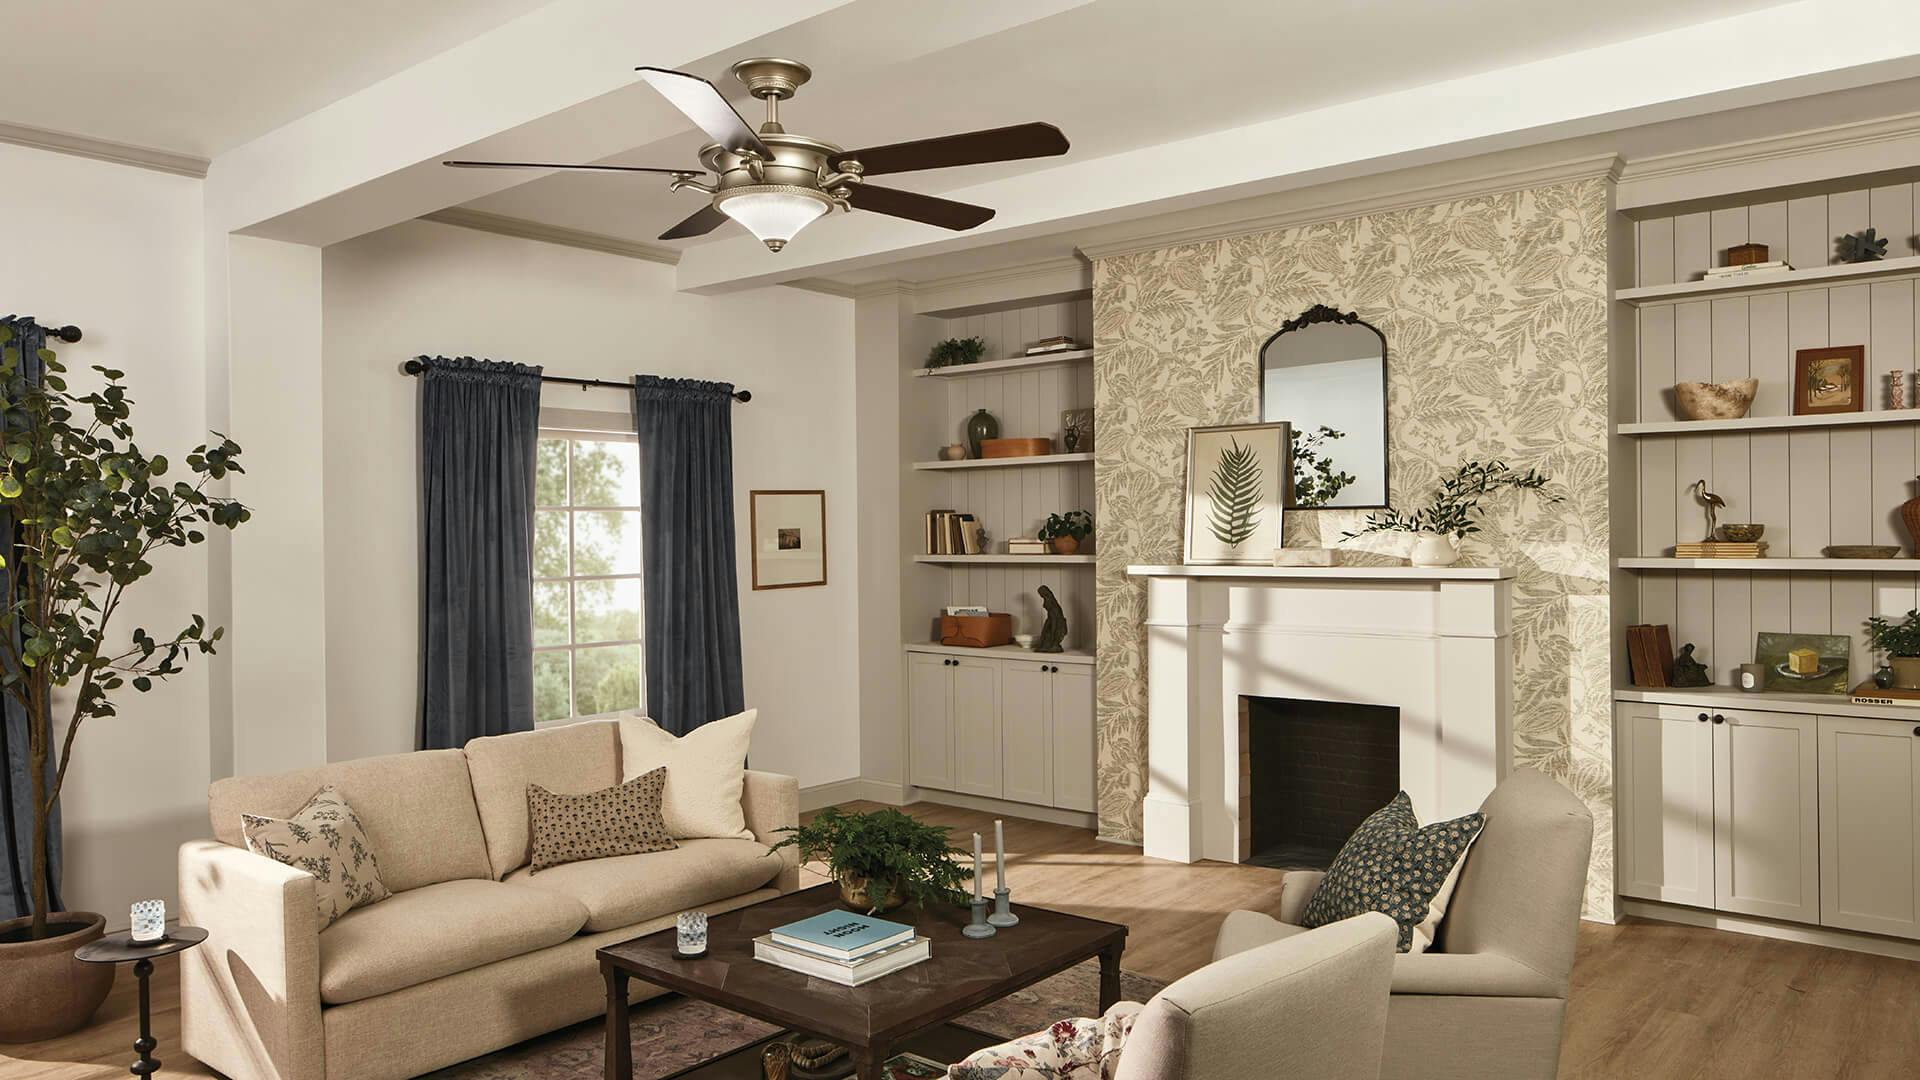 Daytime in an elegant living room with bookshelves and a fireplace in the back wall while a Rise ceiling fan hangs above the couch